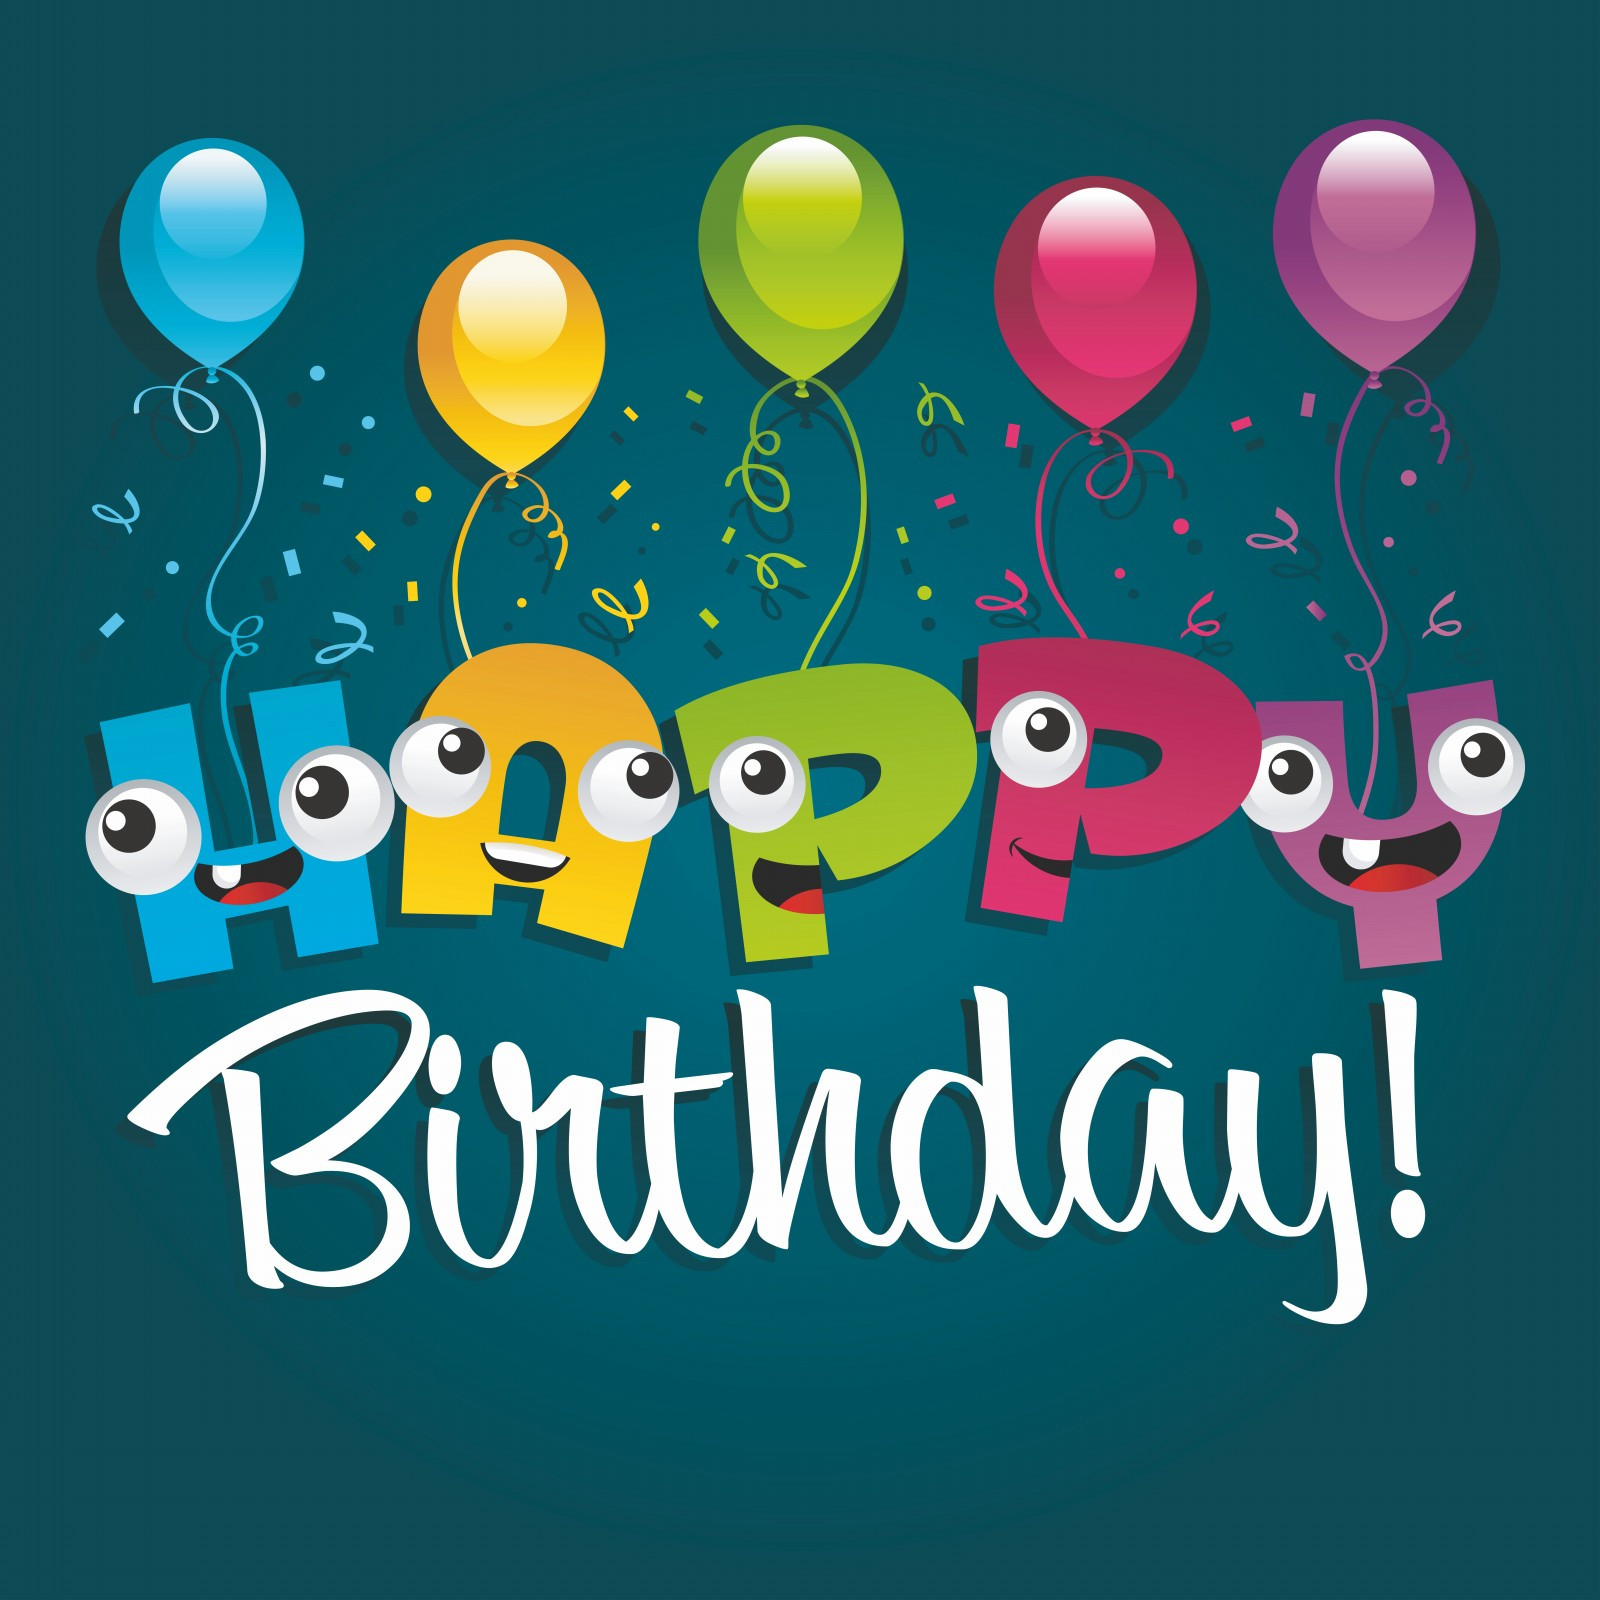 Cards Happy Birthday
 35 Happy Birthday Cards Free To Download – The WoW Style